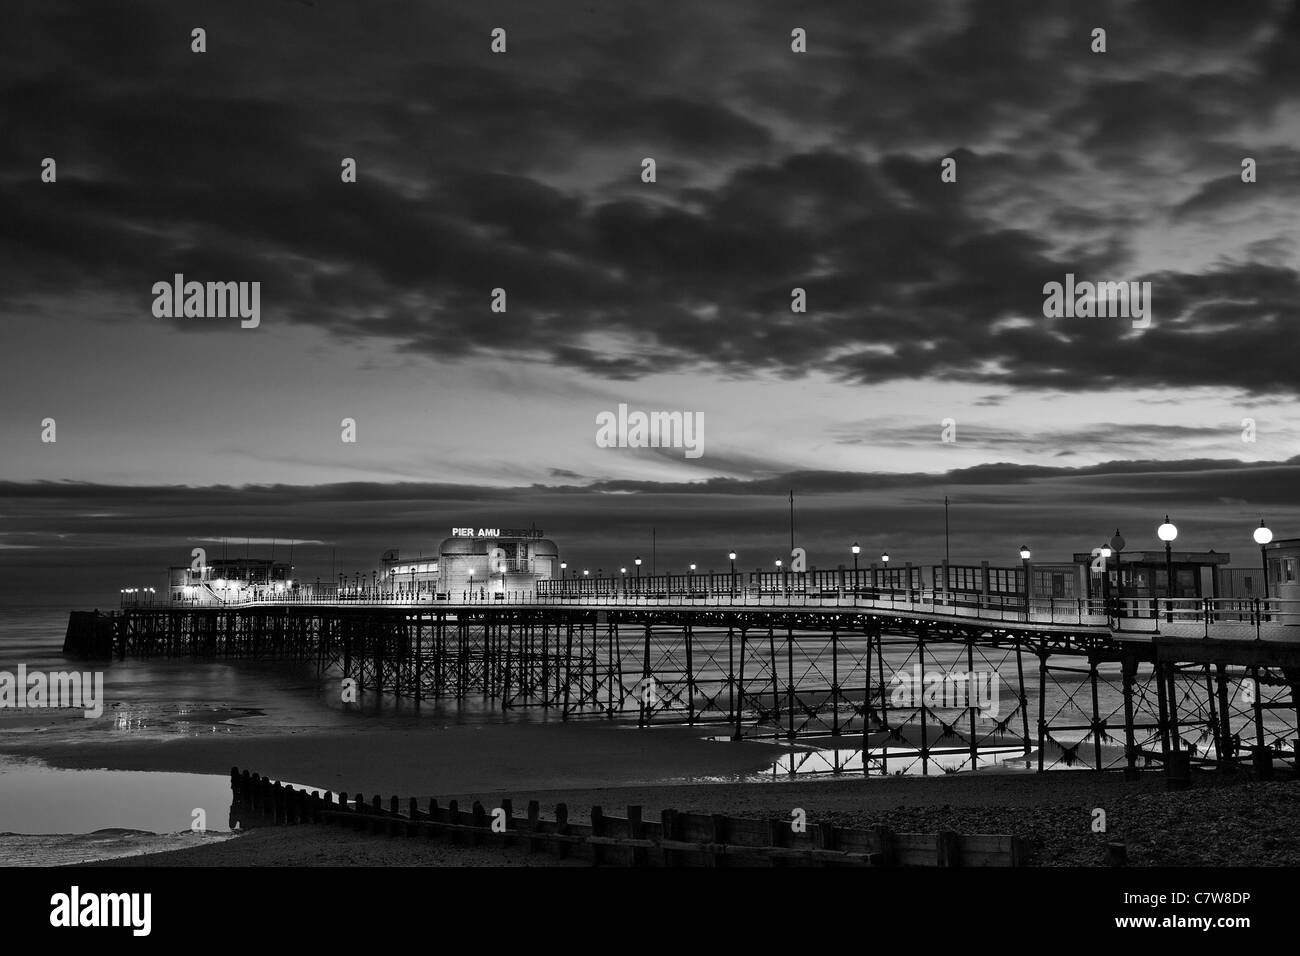 Worthing Pier, West Sussex, cielo nuvoloso,in bianco e nero di notte Foto Stock